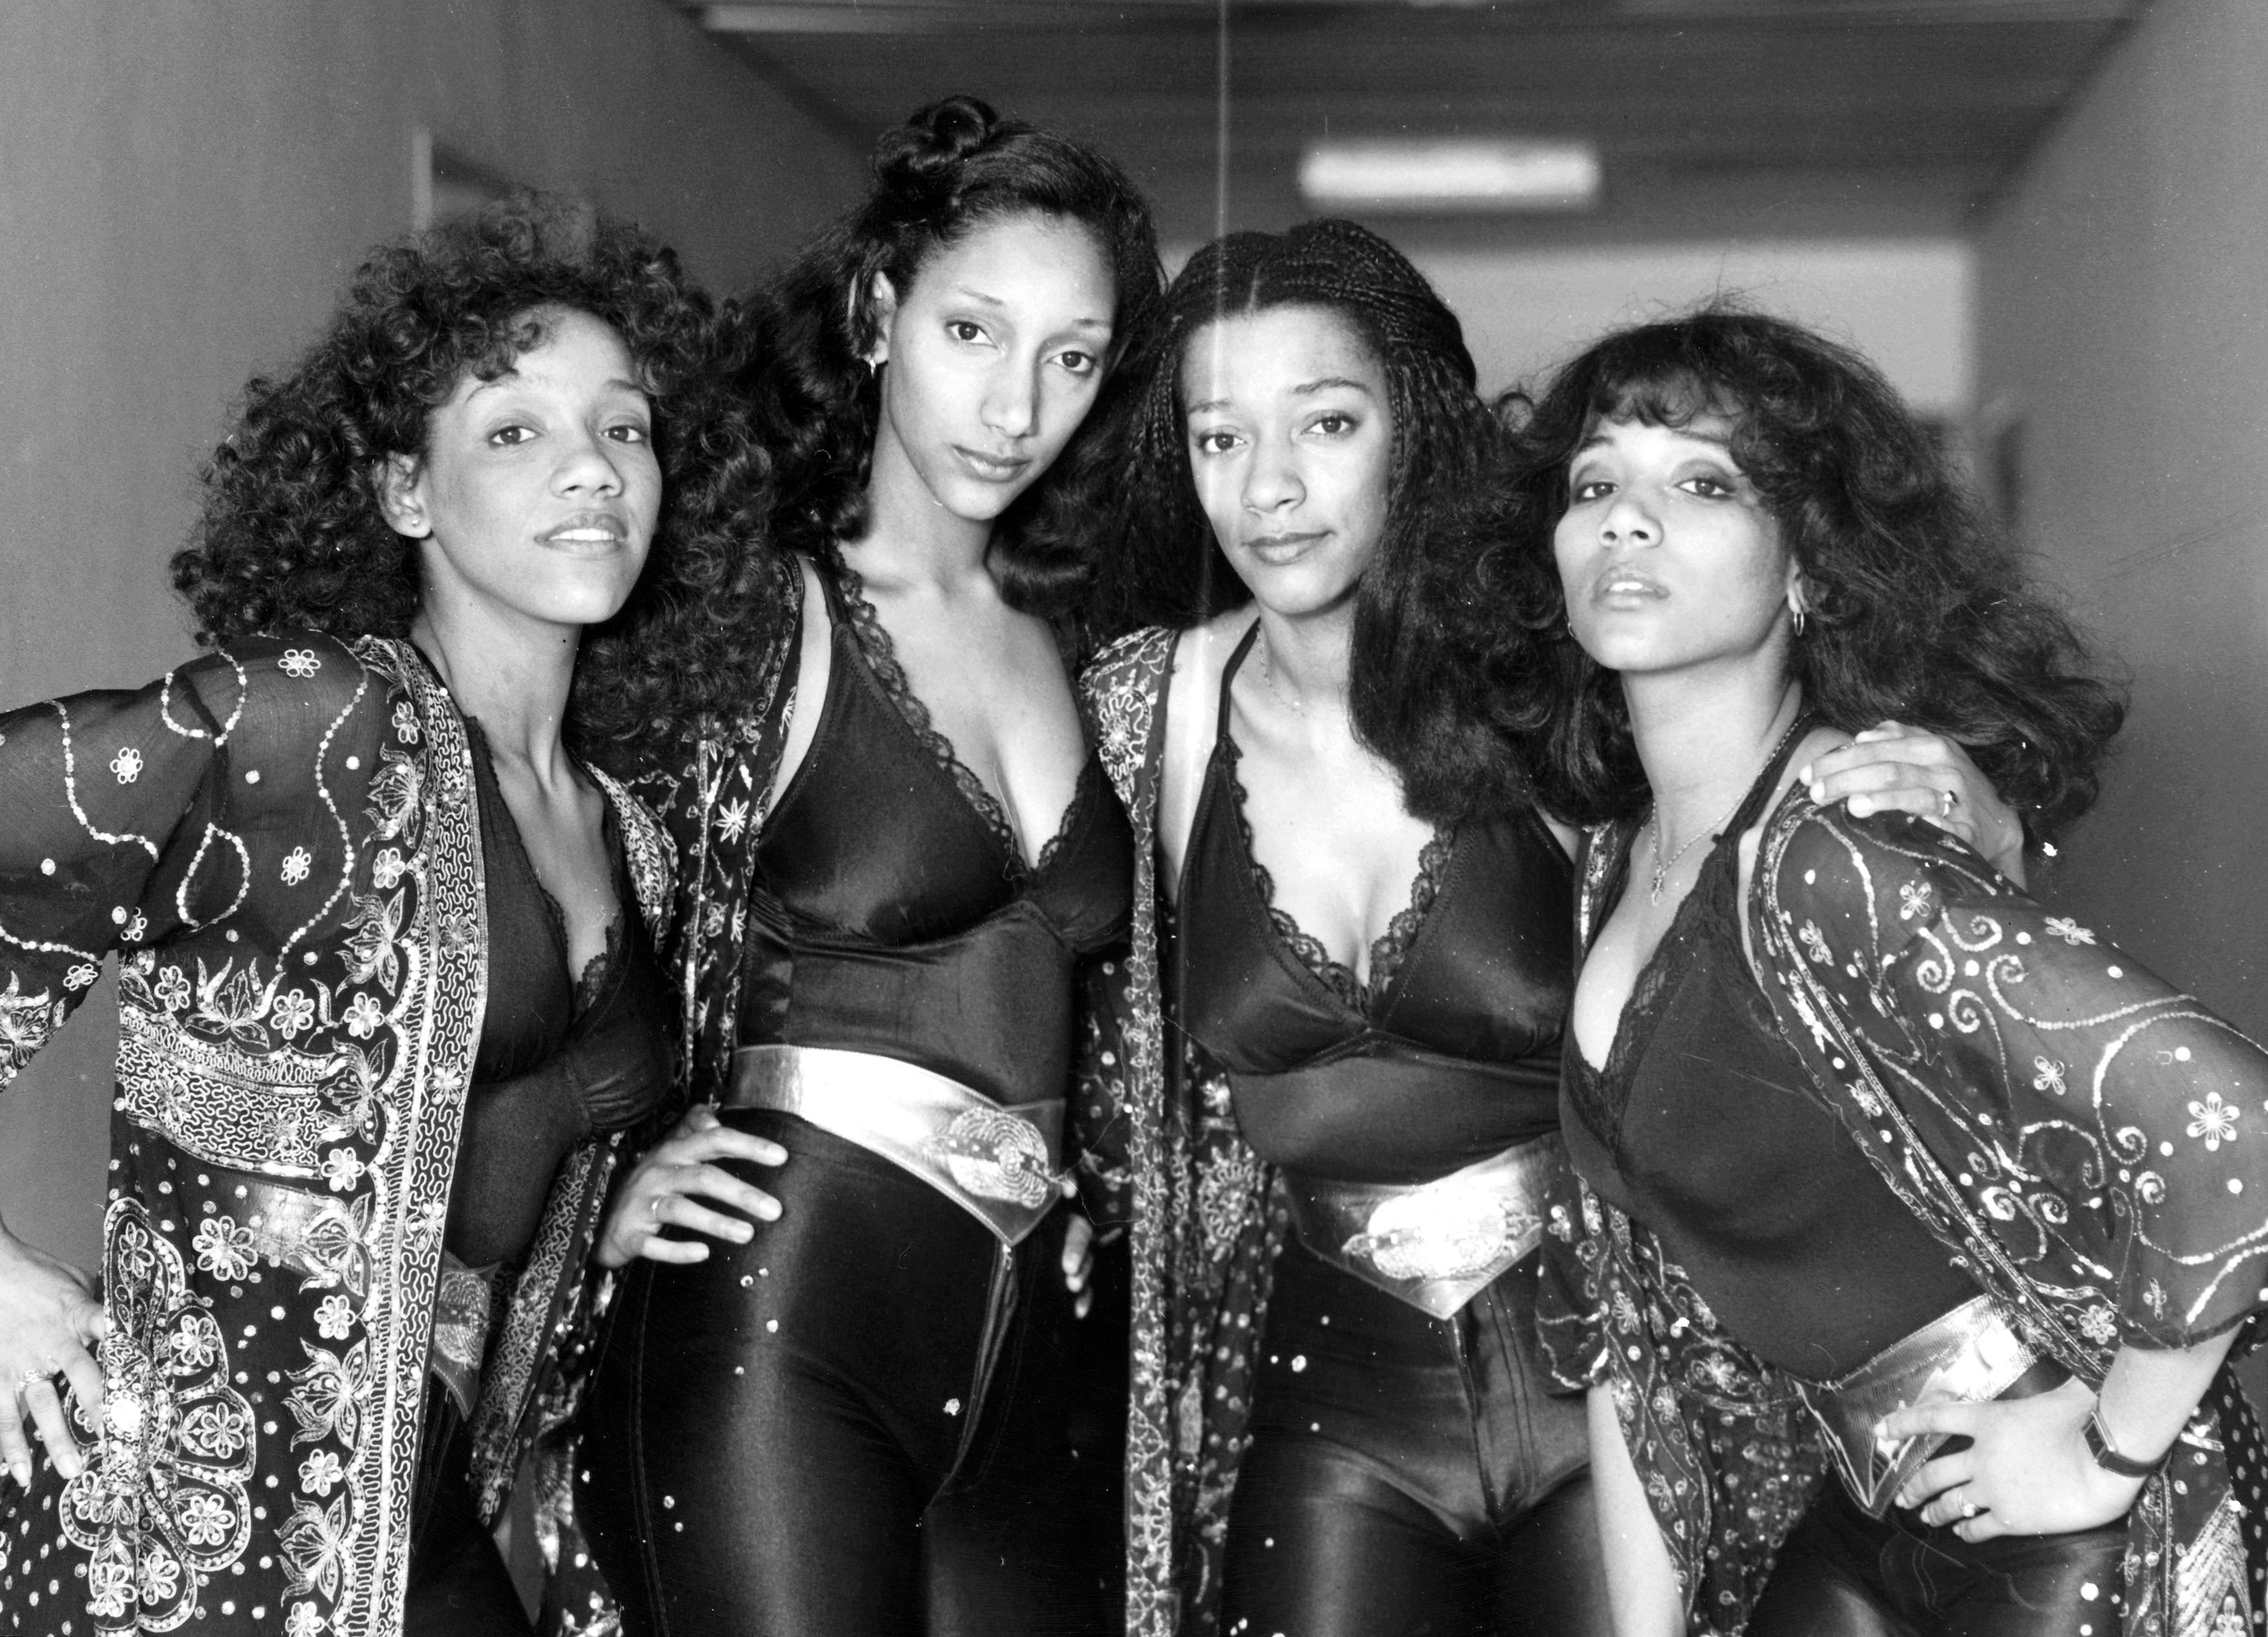 The Sledge Family Release An Official Statement On The Passing of Joni Sledge